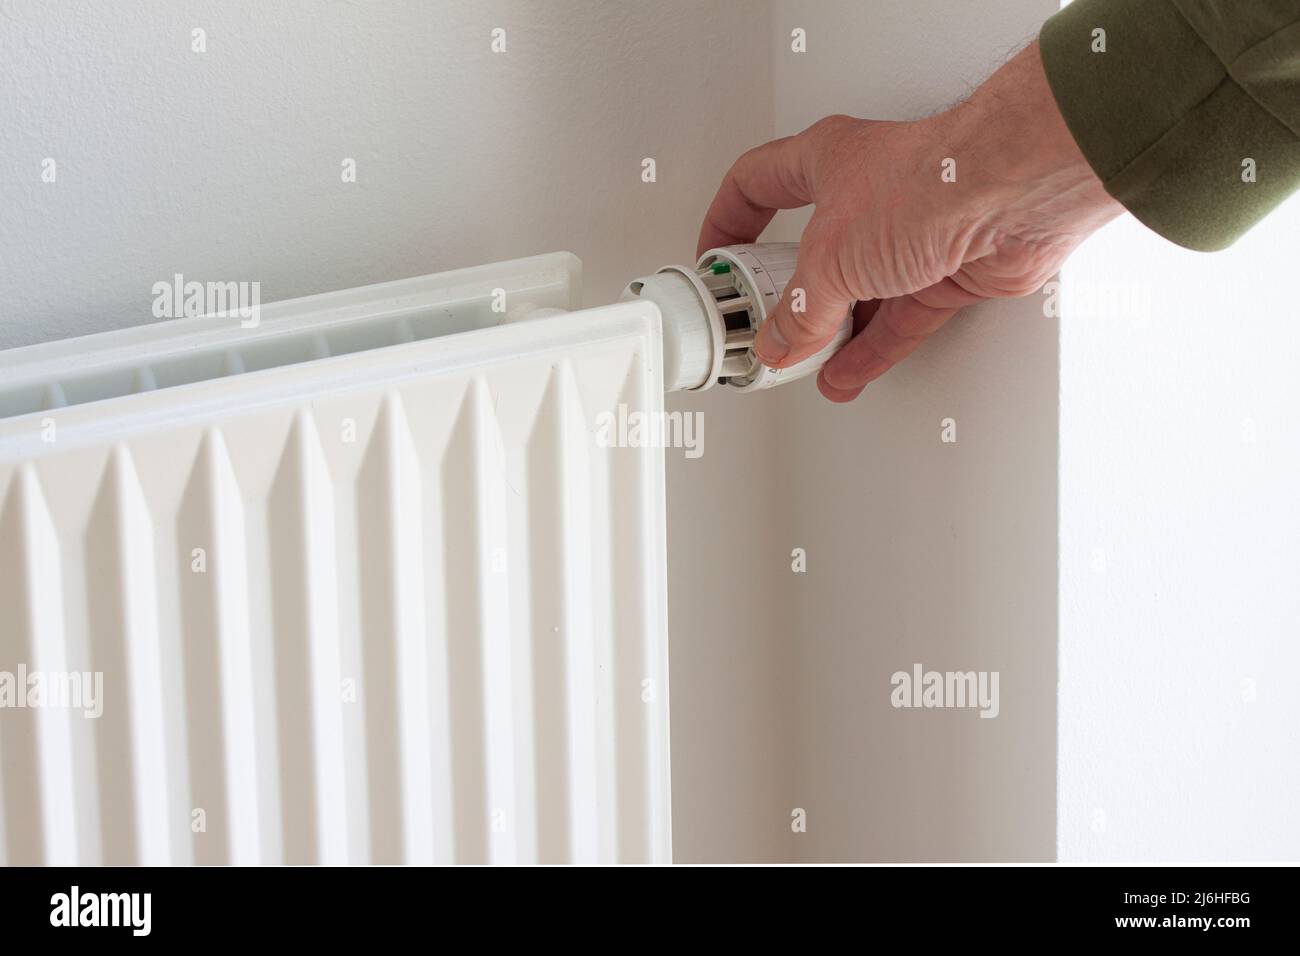 Hand turning down adjusting knob on thermostat on radiator valve to save energy due to heating cost price. Temperature control. Stock Photo